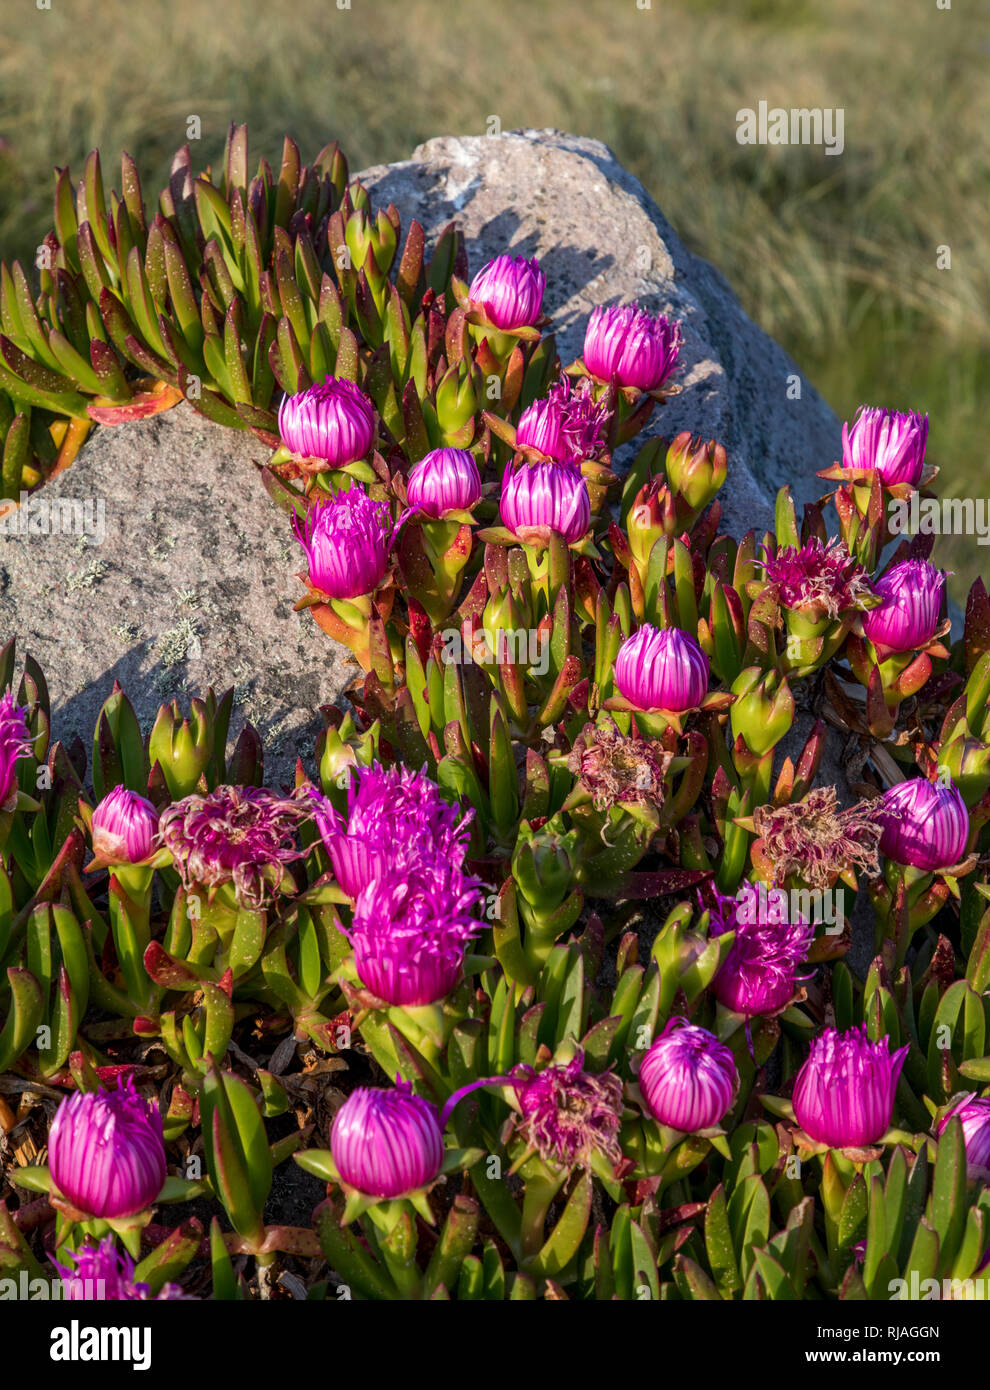 The Alderney fig plant (carpobrotus) with daisy like purple flowers in spring, it has edible fruit and is commonly known as pigface or ice-plant. Stock Photo